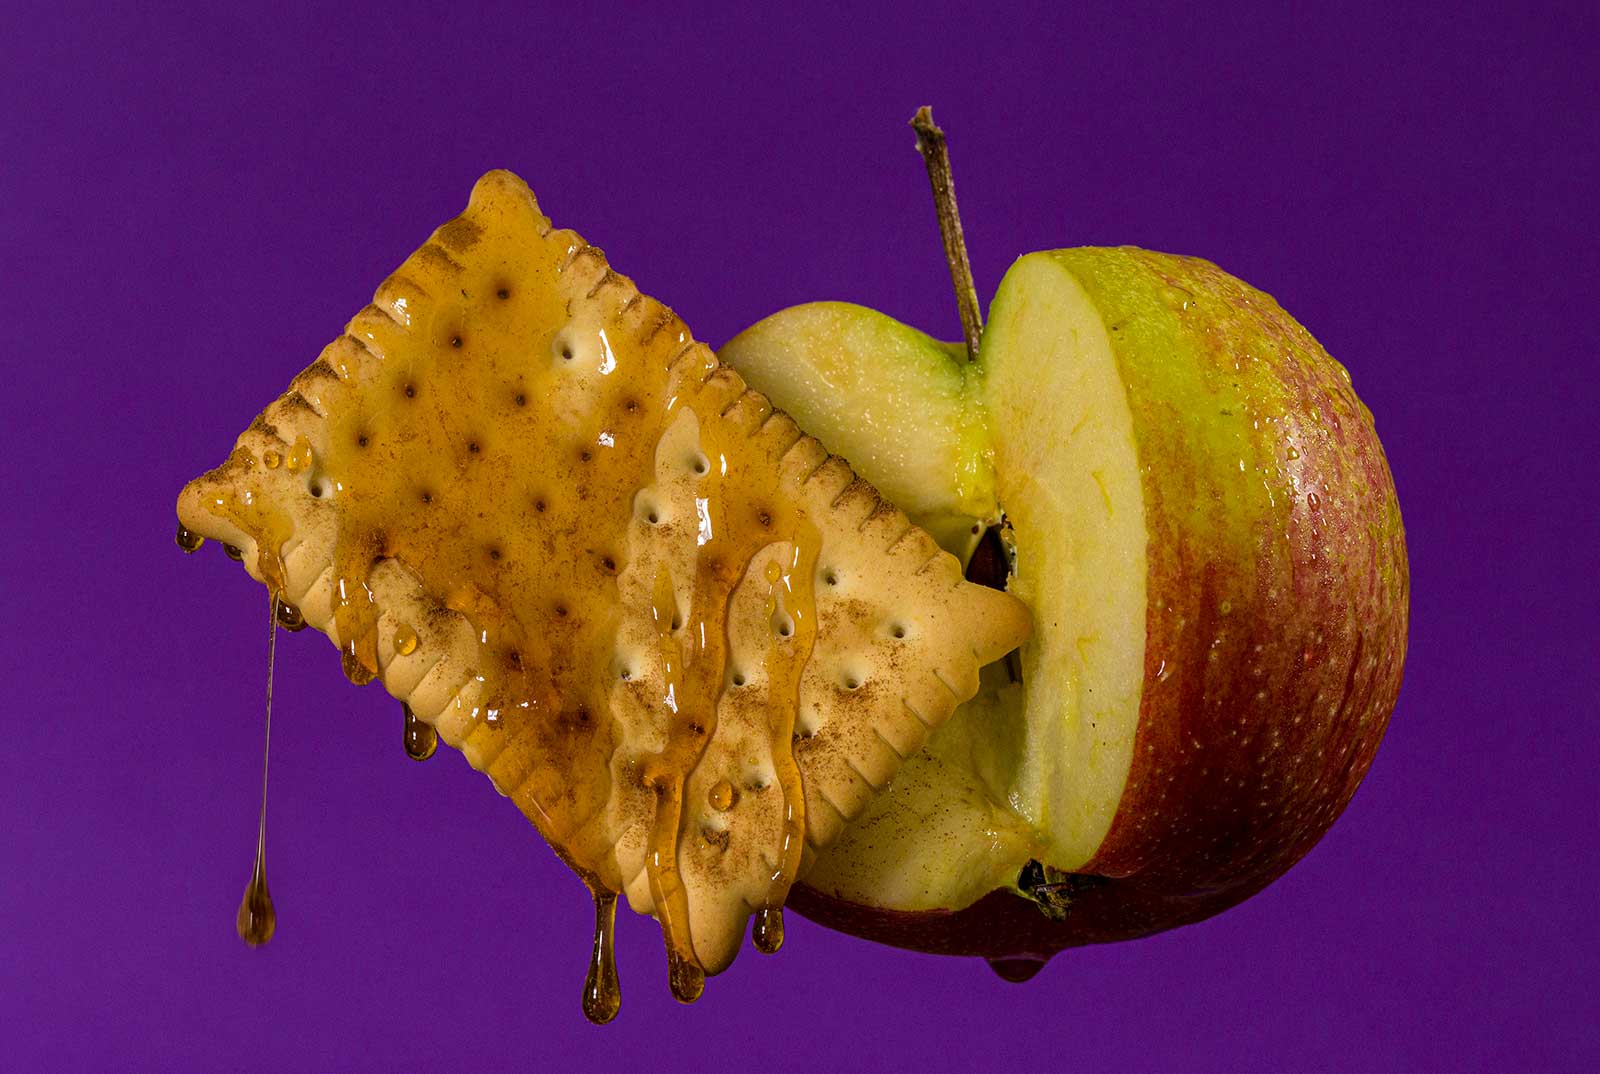 Apple, biscuit, a sprinkle of cinnamon and honey on purple background